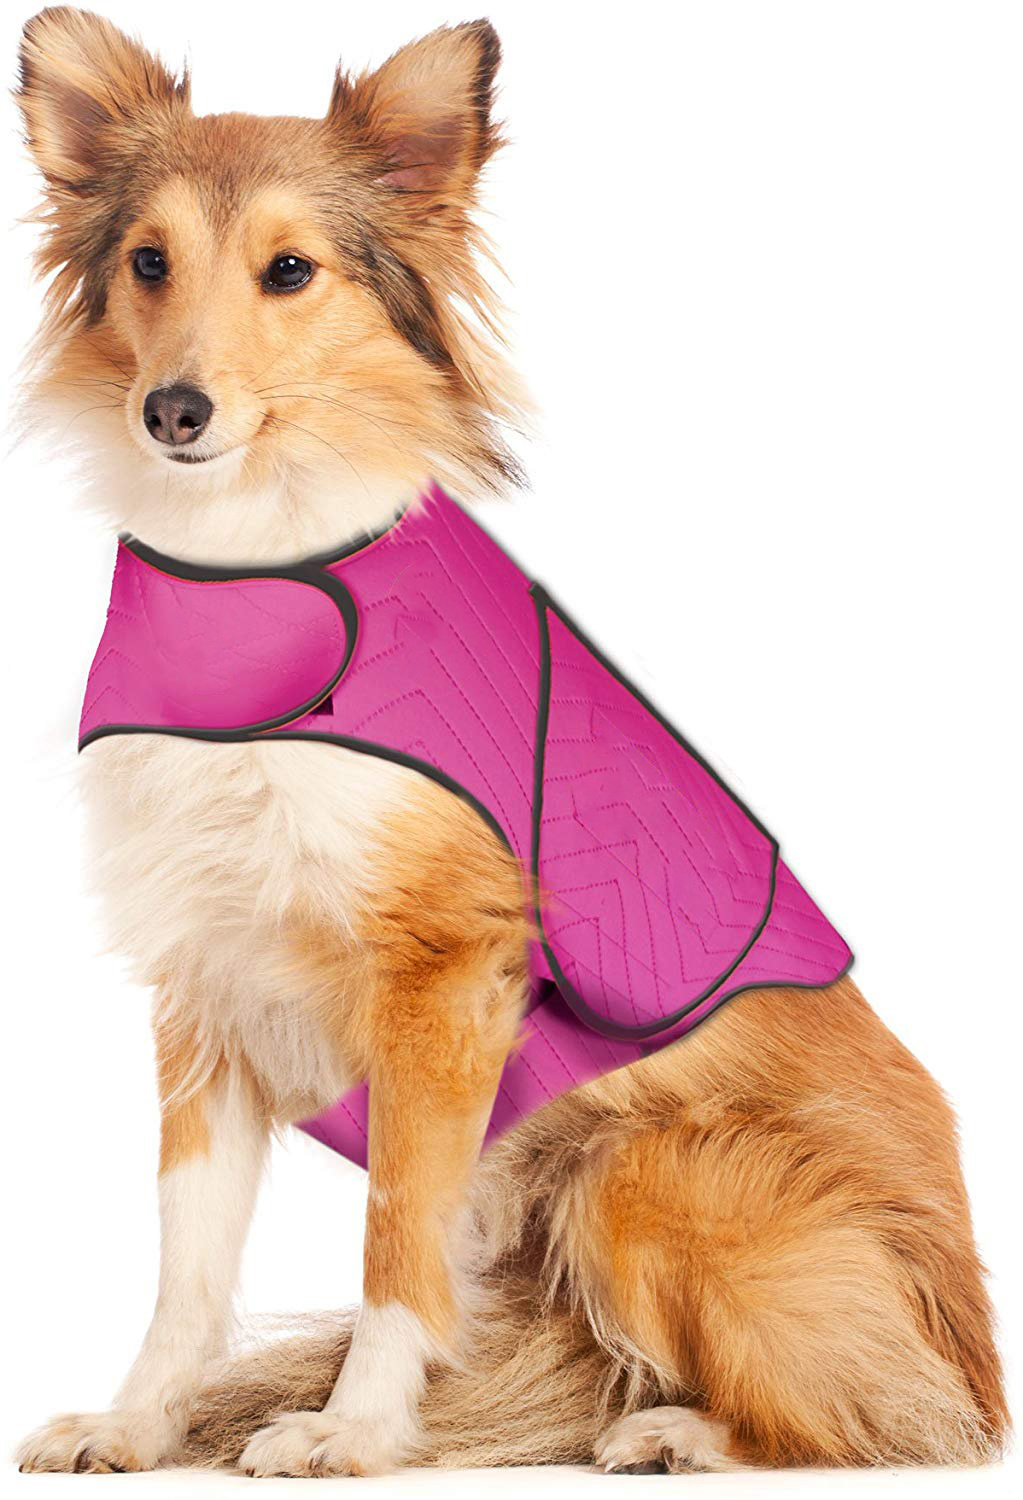 Anti Anxiety and Stress Relief Calming Coat for Dogs